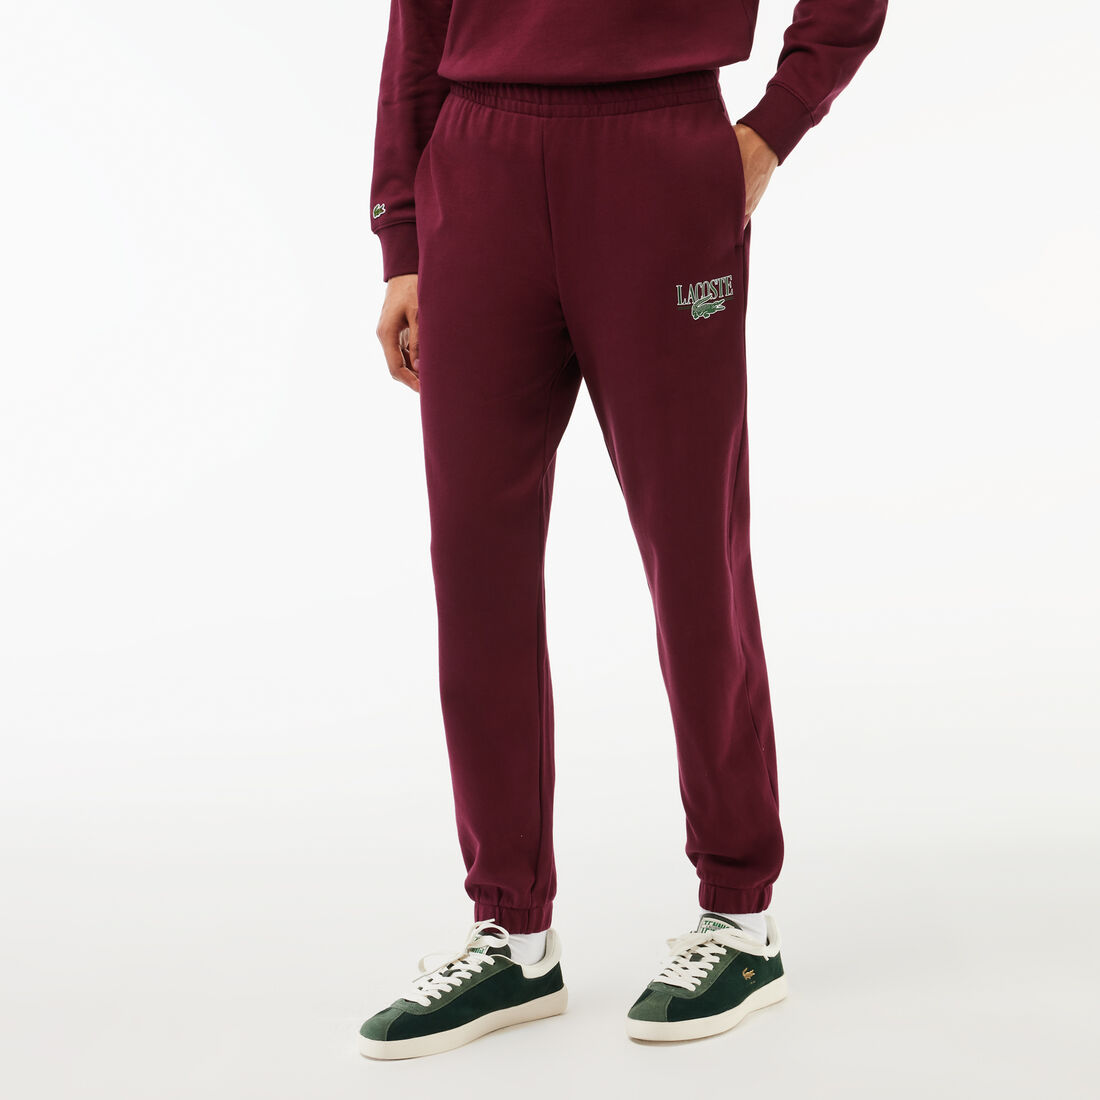 Lacoste Printed Jogger Track Pants - XF1710-00-YUP